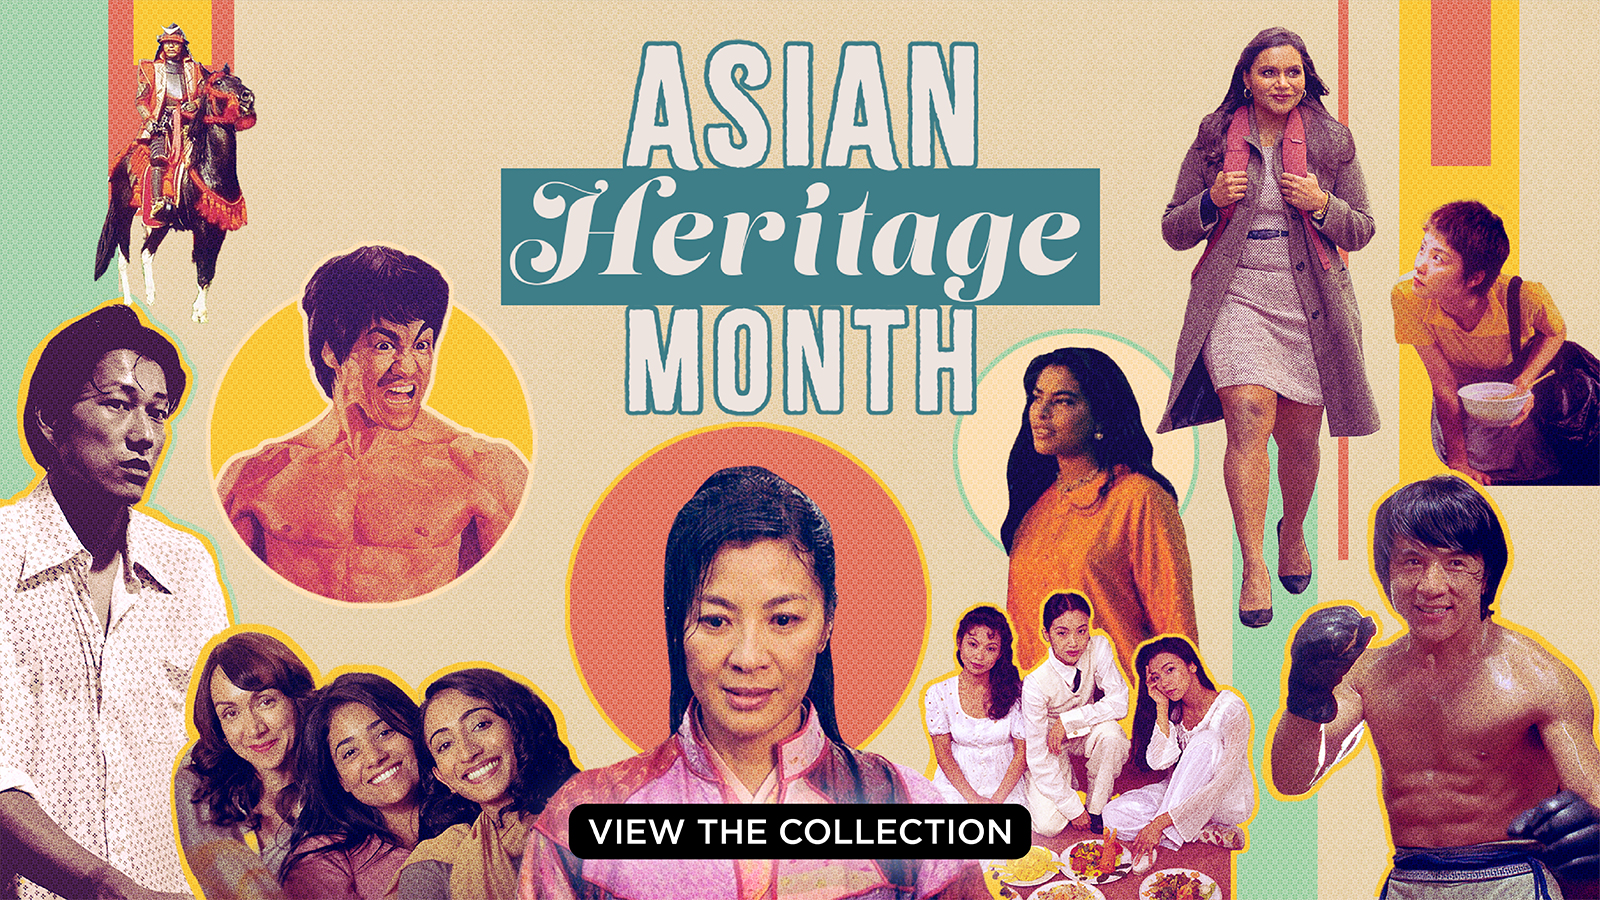 Asian Heritage Month - View the Collection